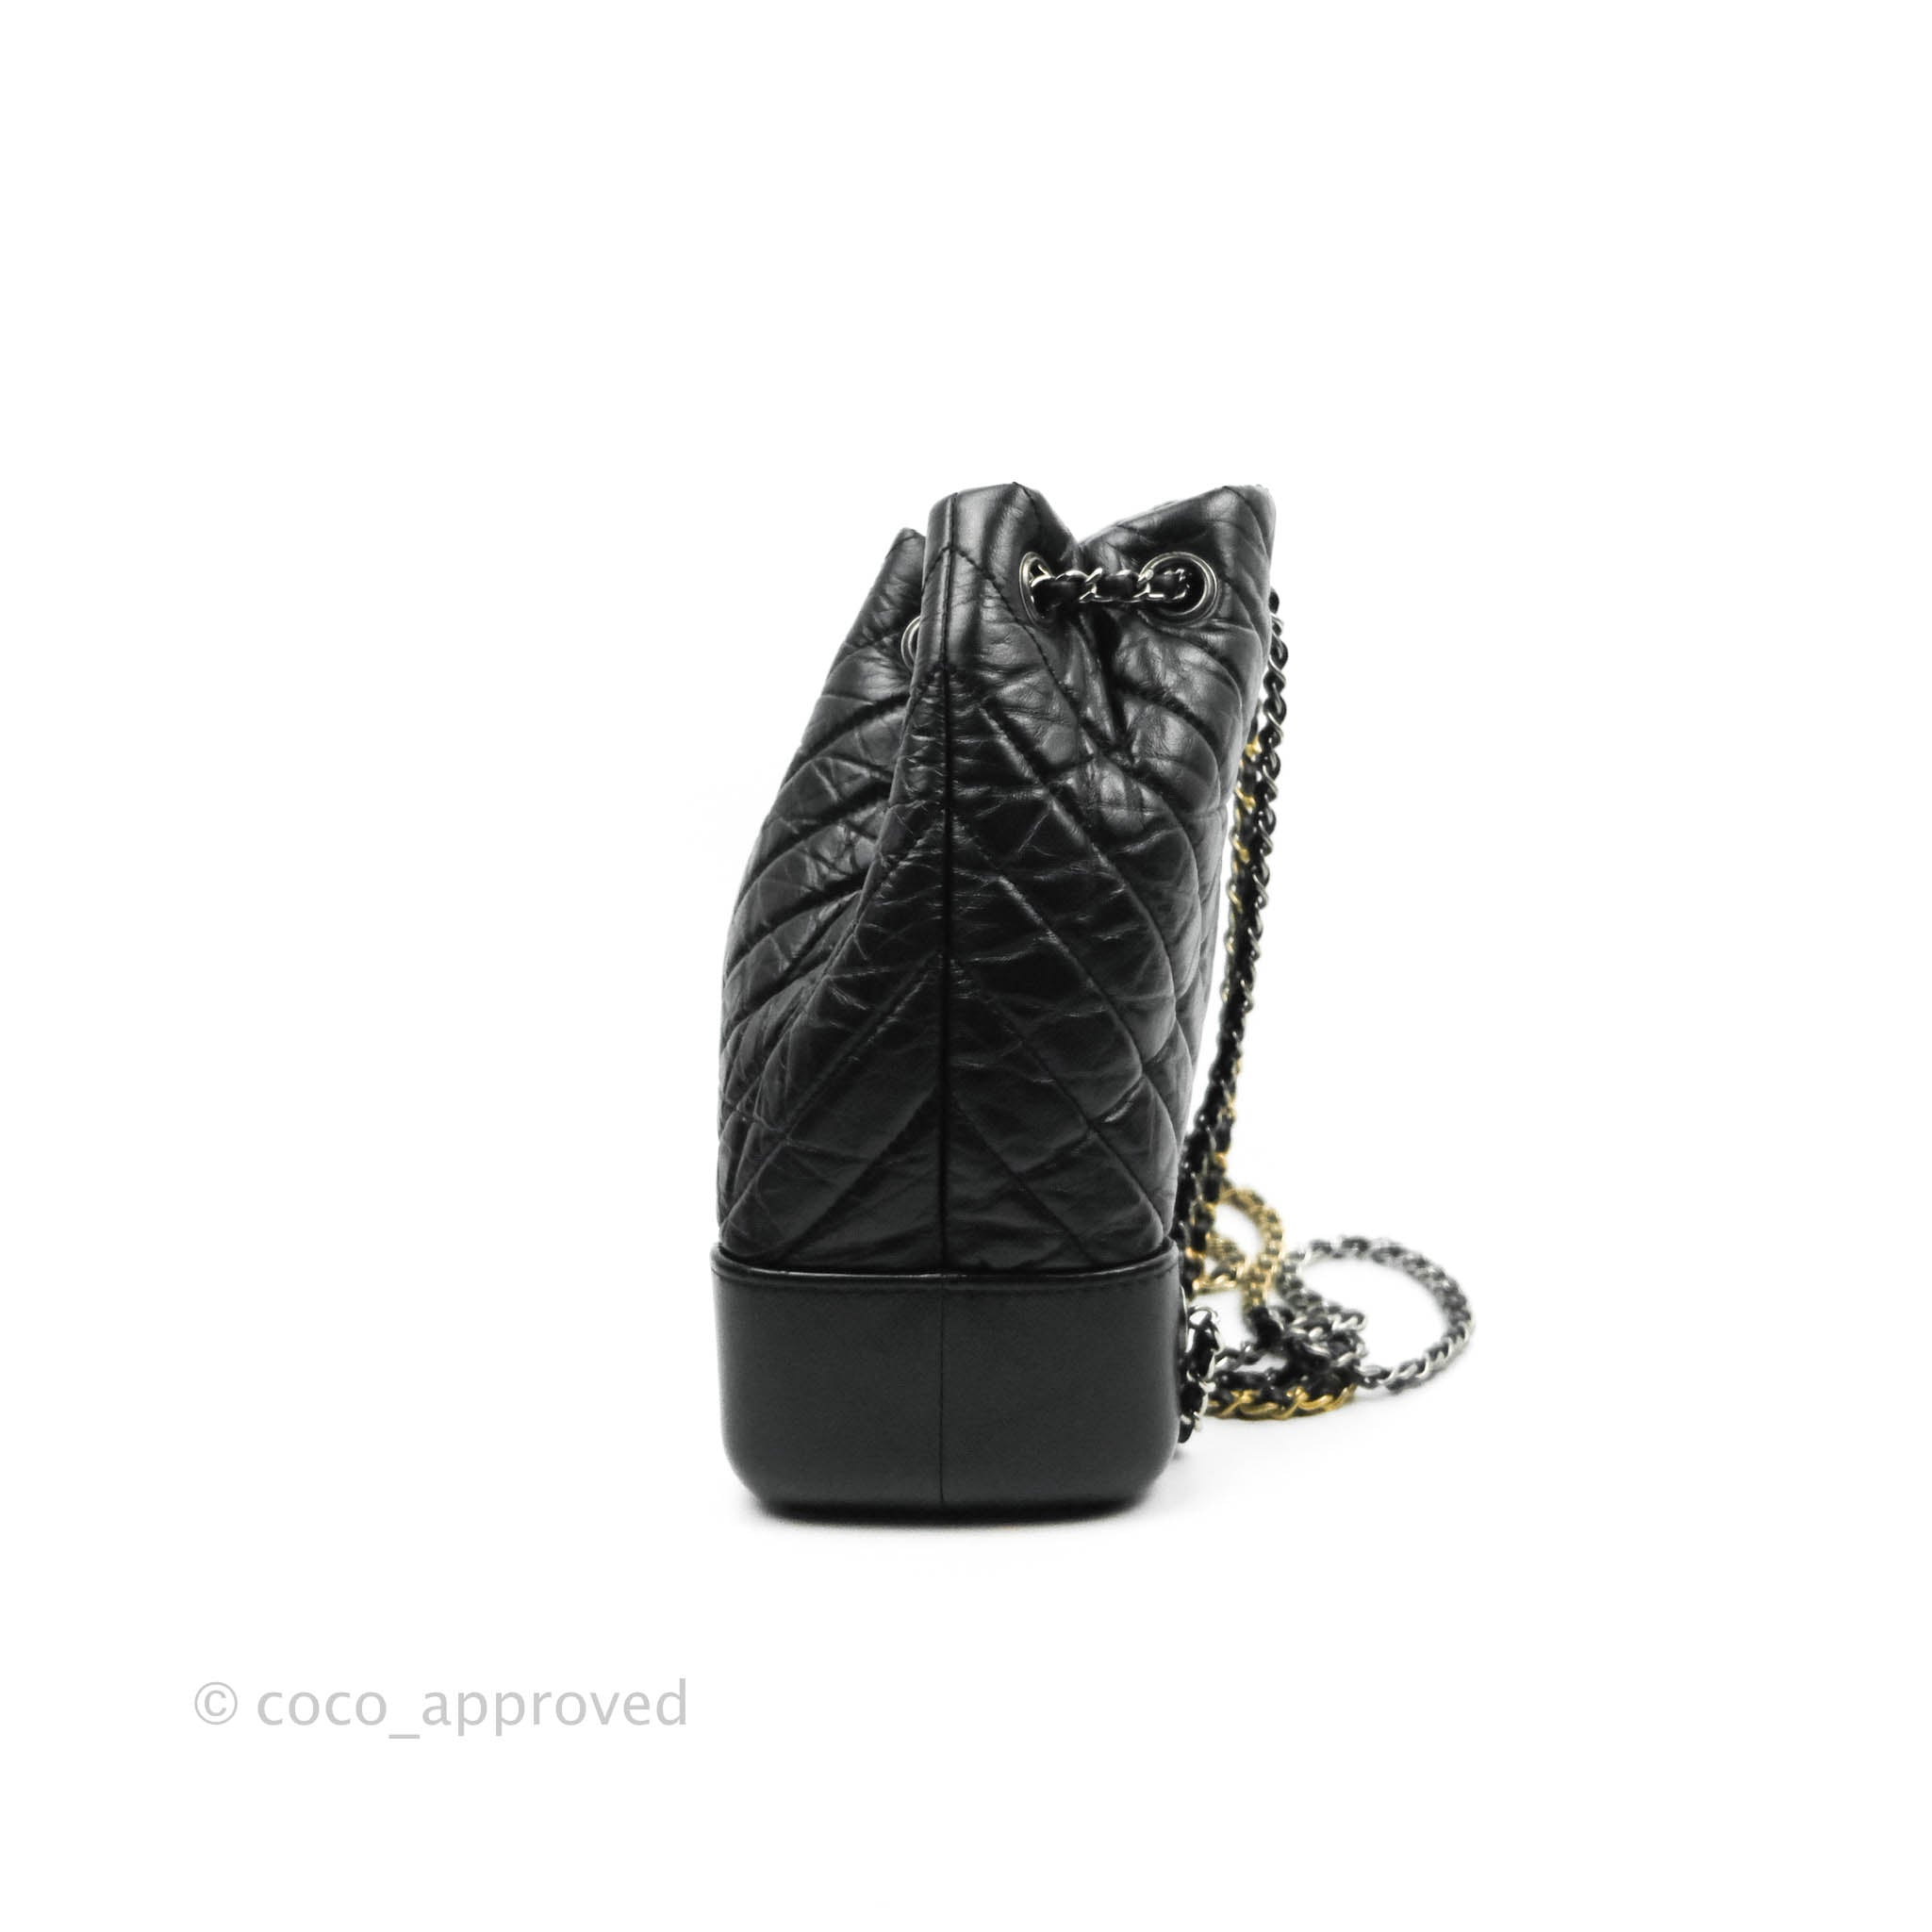 Authentic Chanel Small Gabrielle Backpack Black Chevron, Luxury